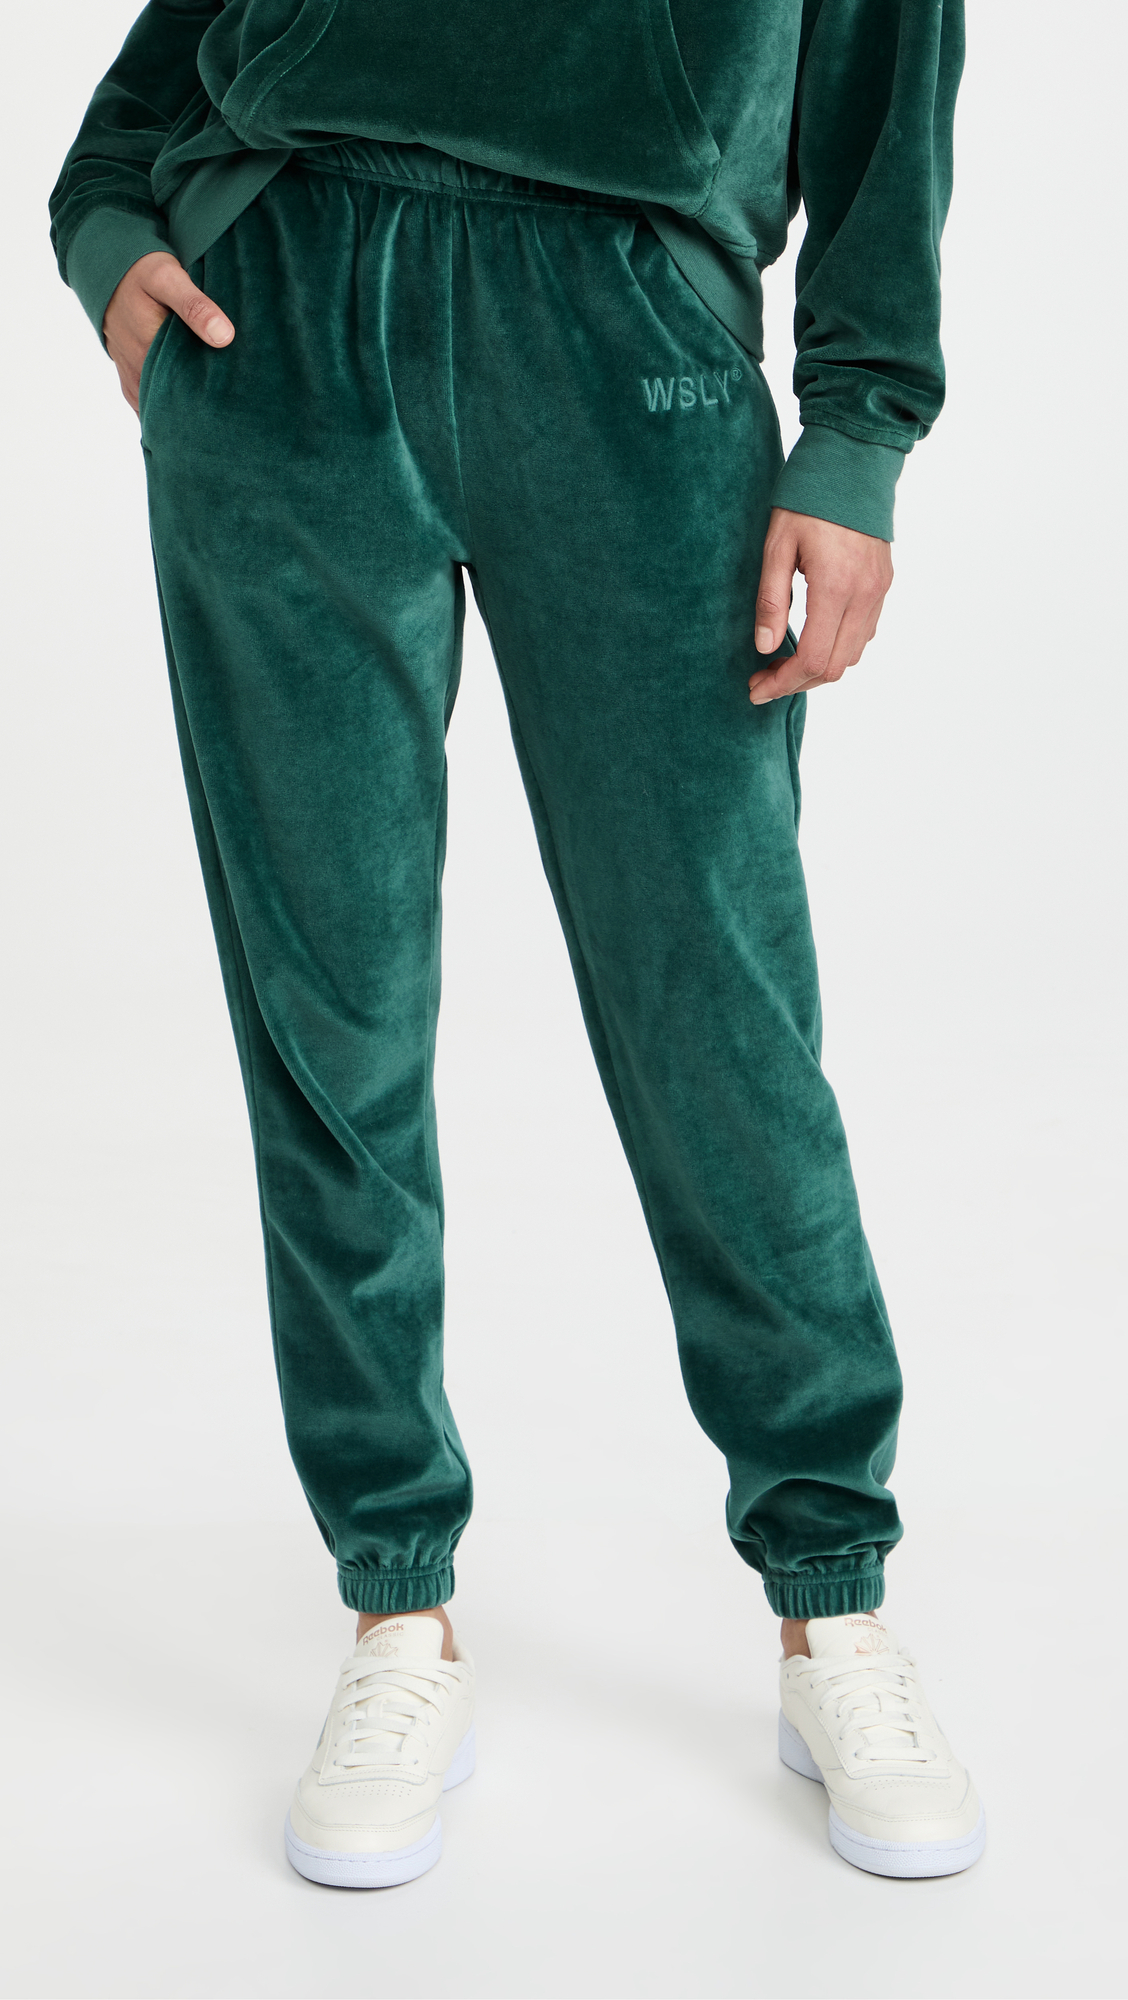 WSLY The Plush Classic Pocket Joggers